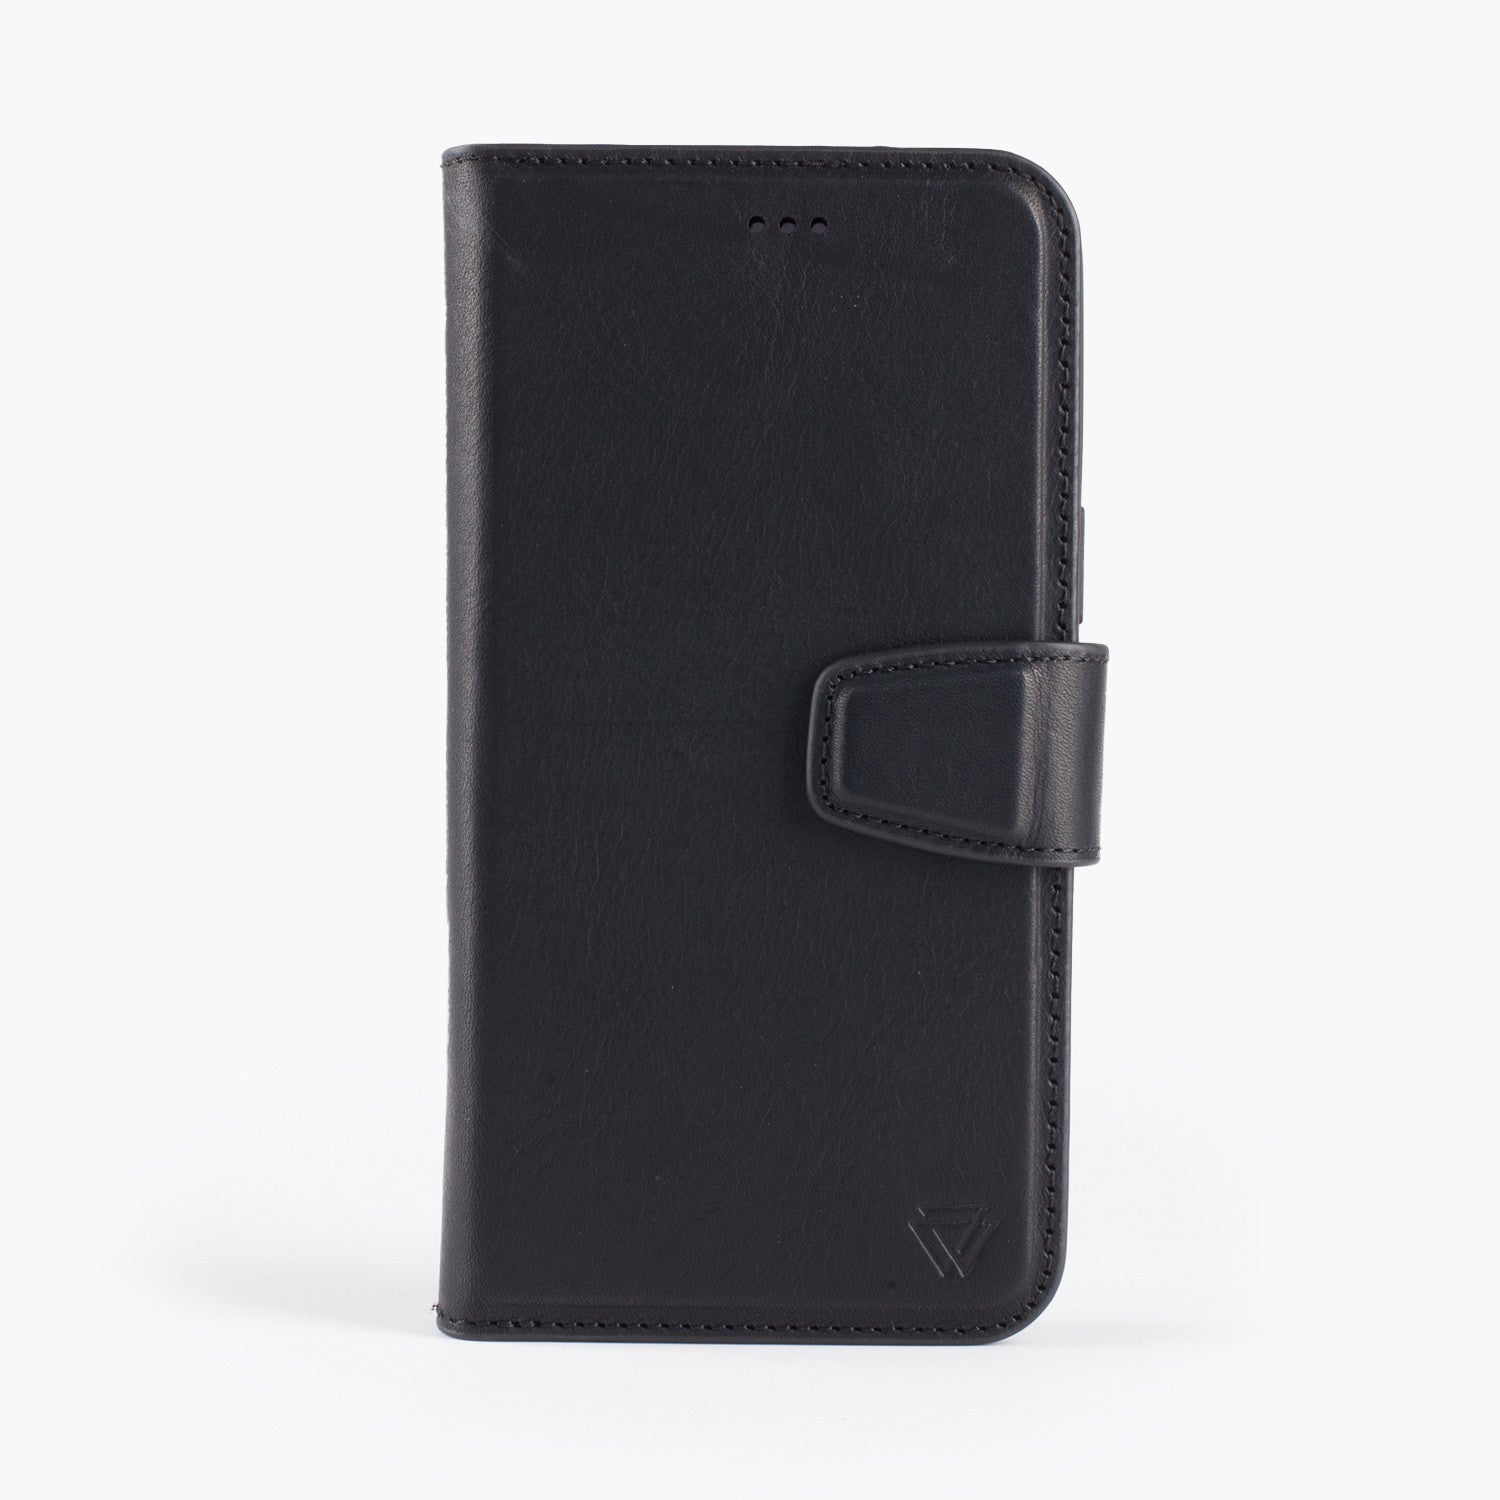 Wachikopa leather Magic Book Case 2 in 1 for iPhone 13 Pro Black